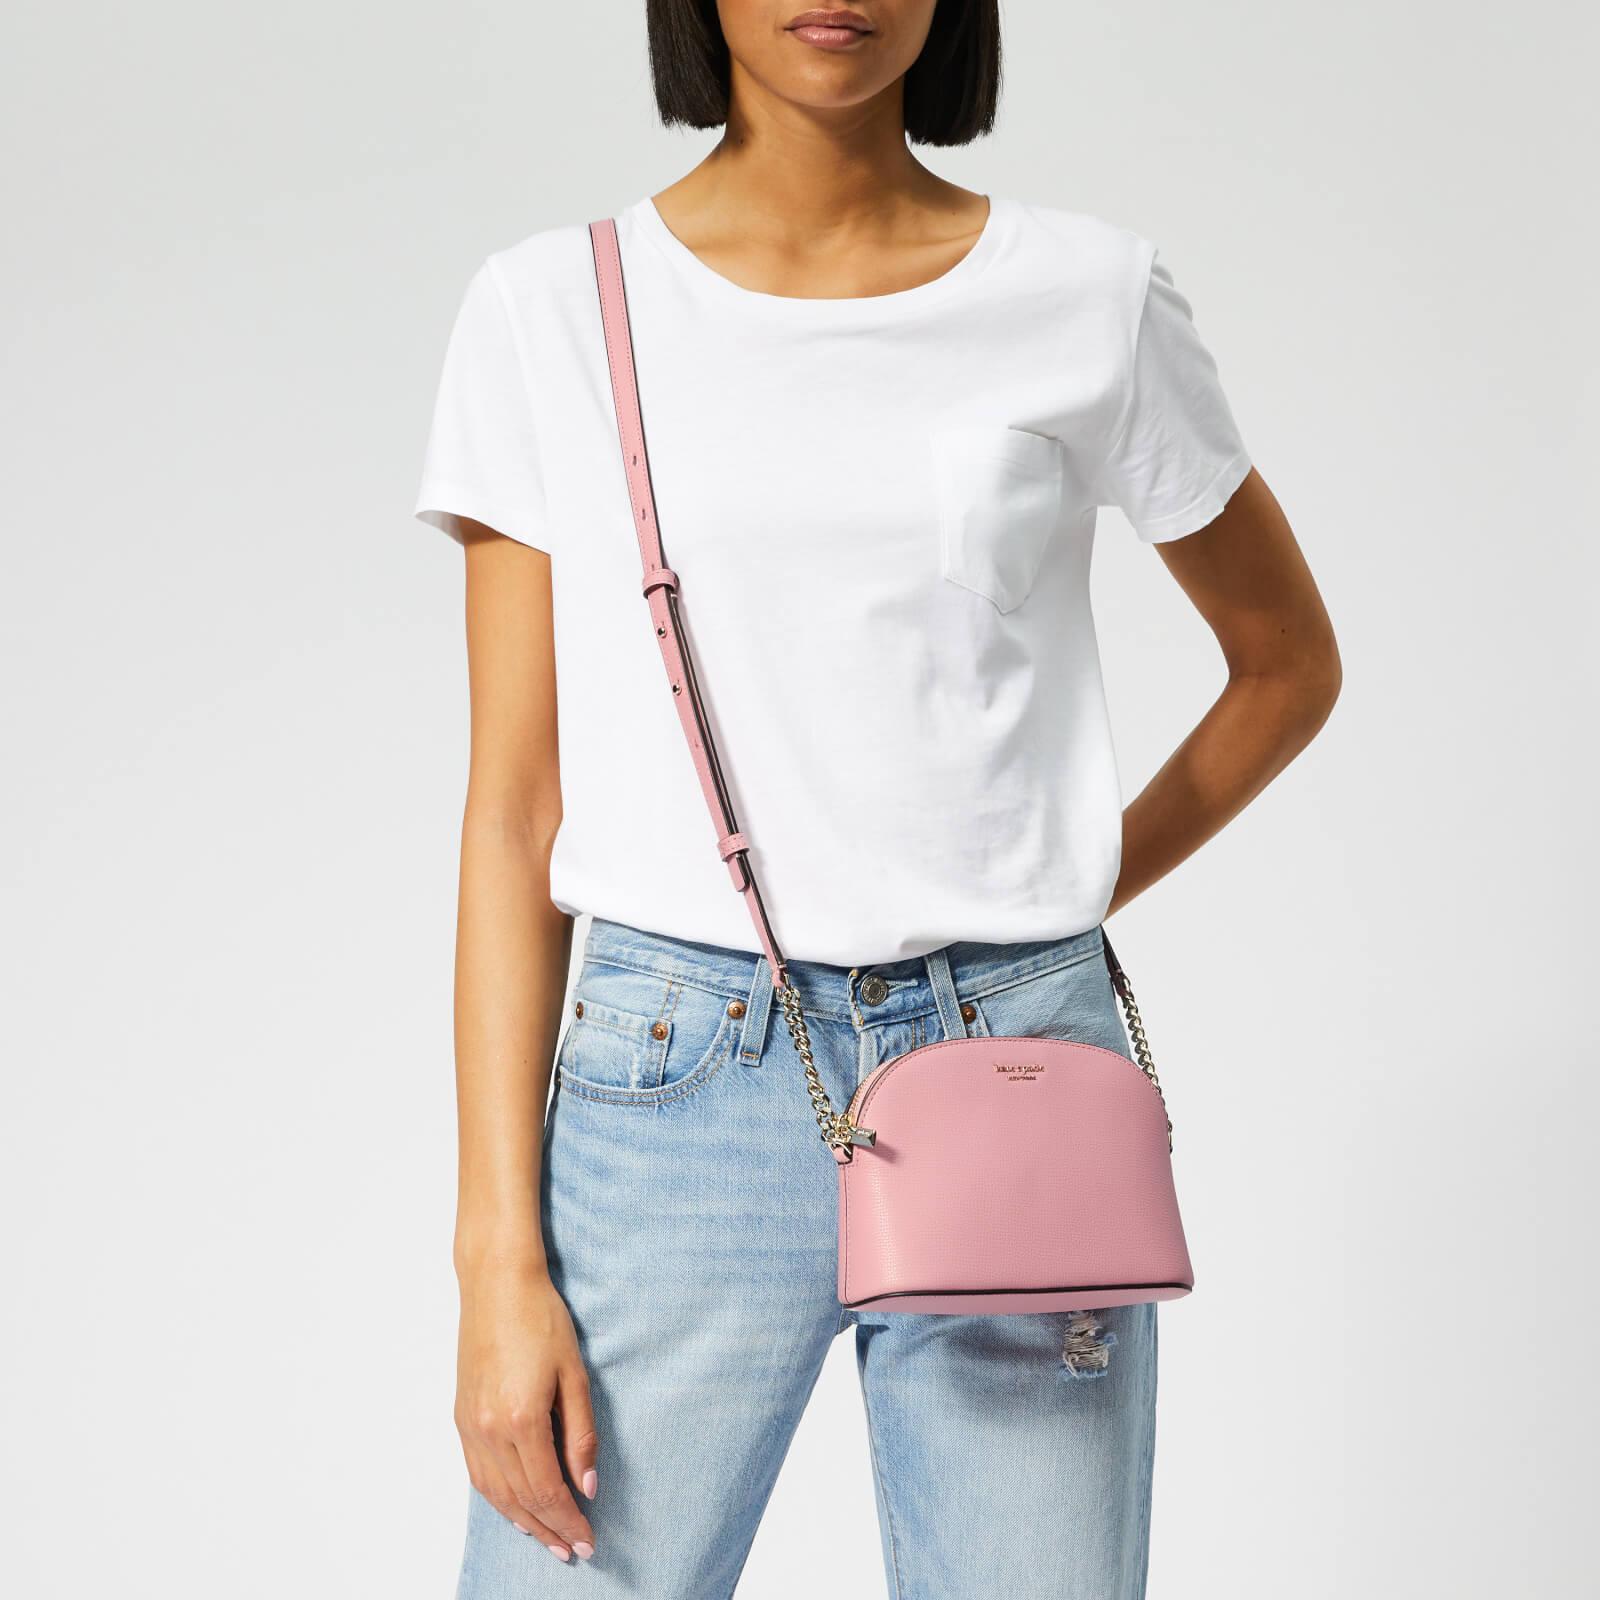 Kate Spade Sylvia Small Dome Cross Body Bag in Pink